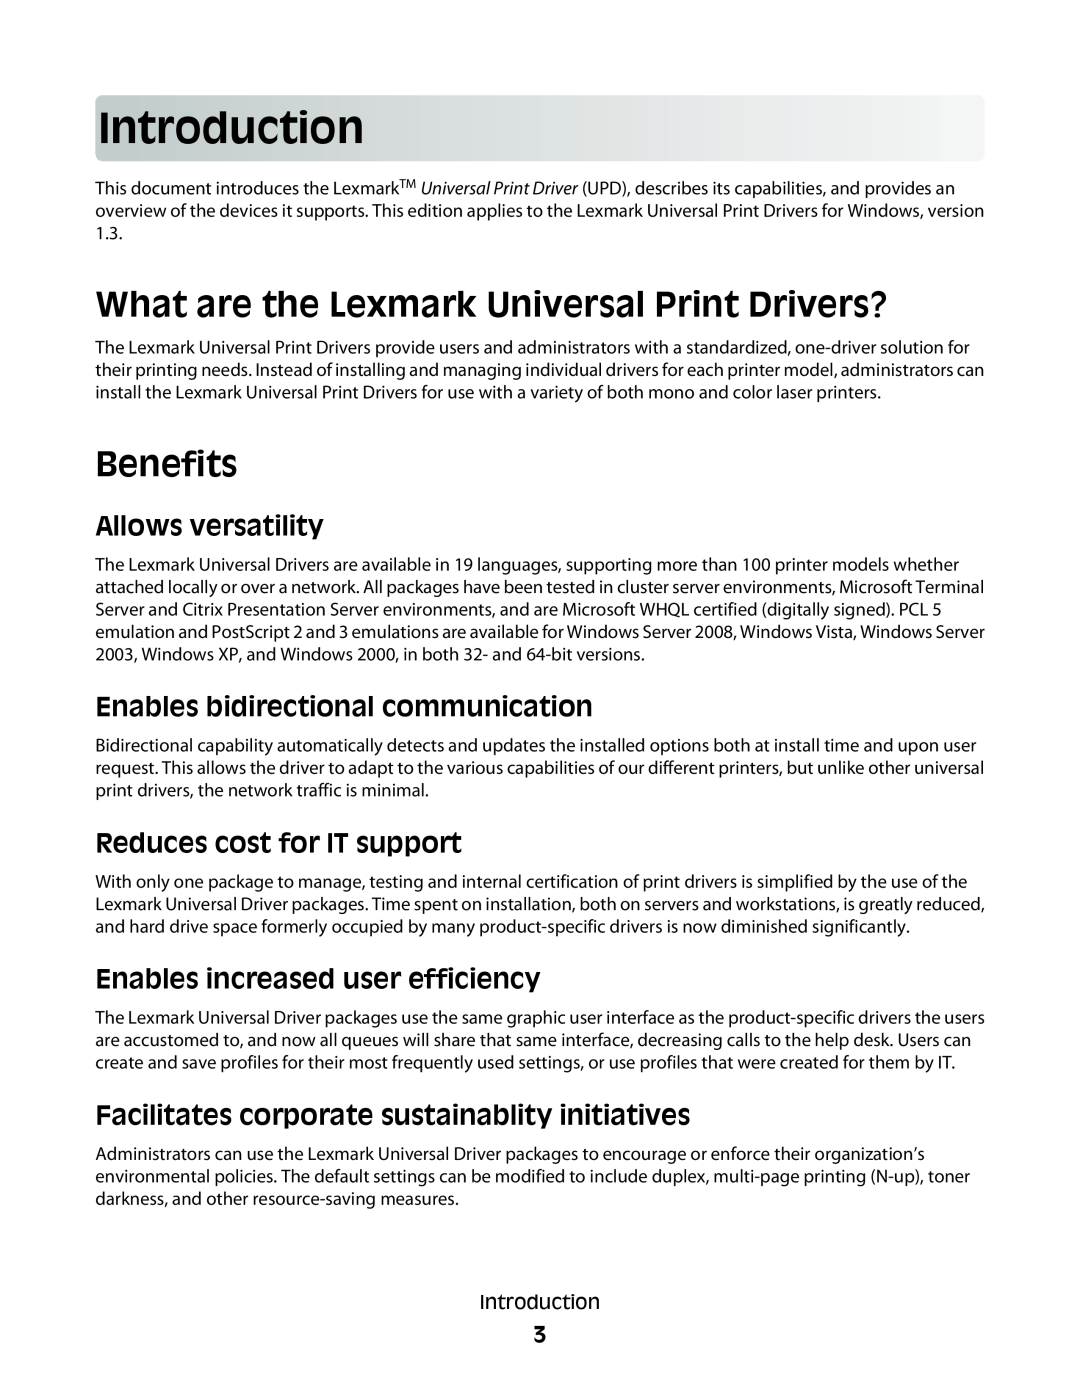 Lexmark Universal Driver manual Intro duction, What are the Lexmark Universal Print Drivers?, Benefits, Allows versatility 